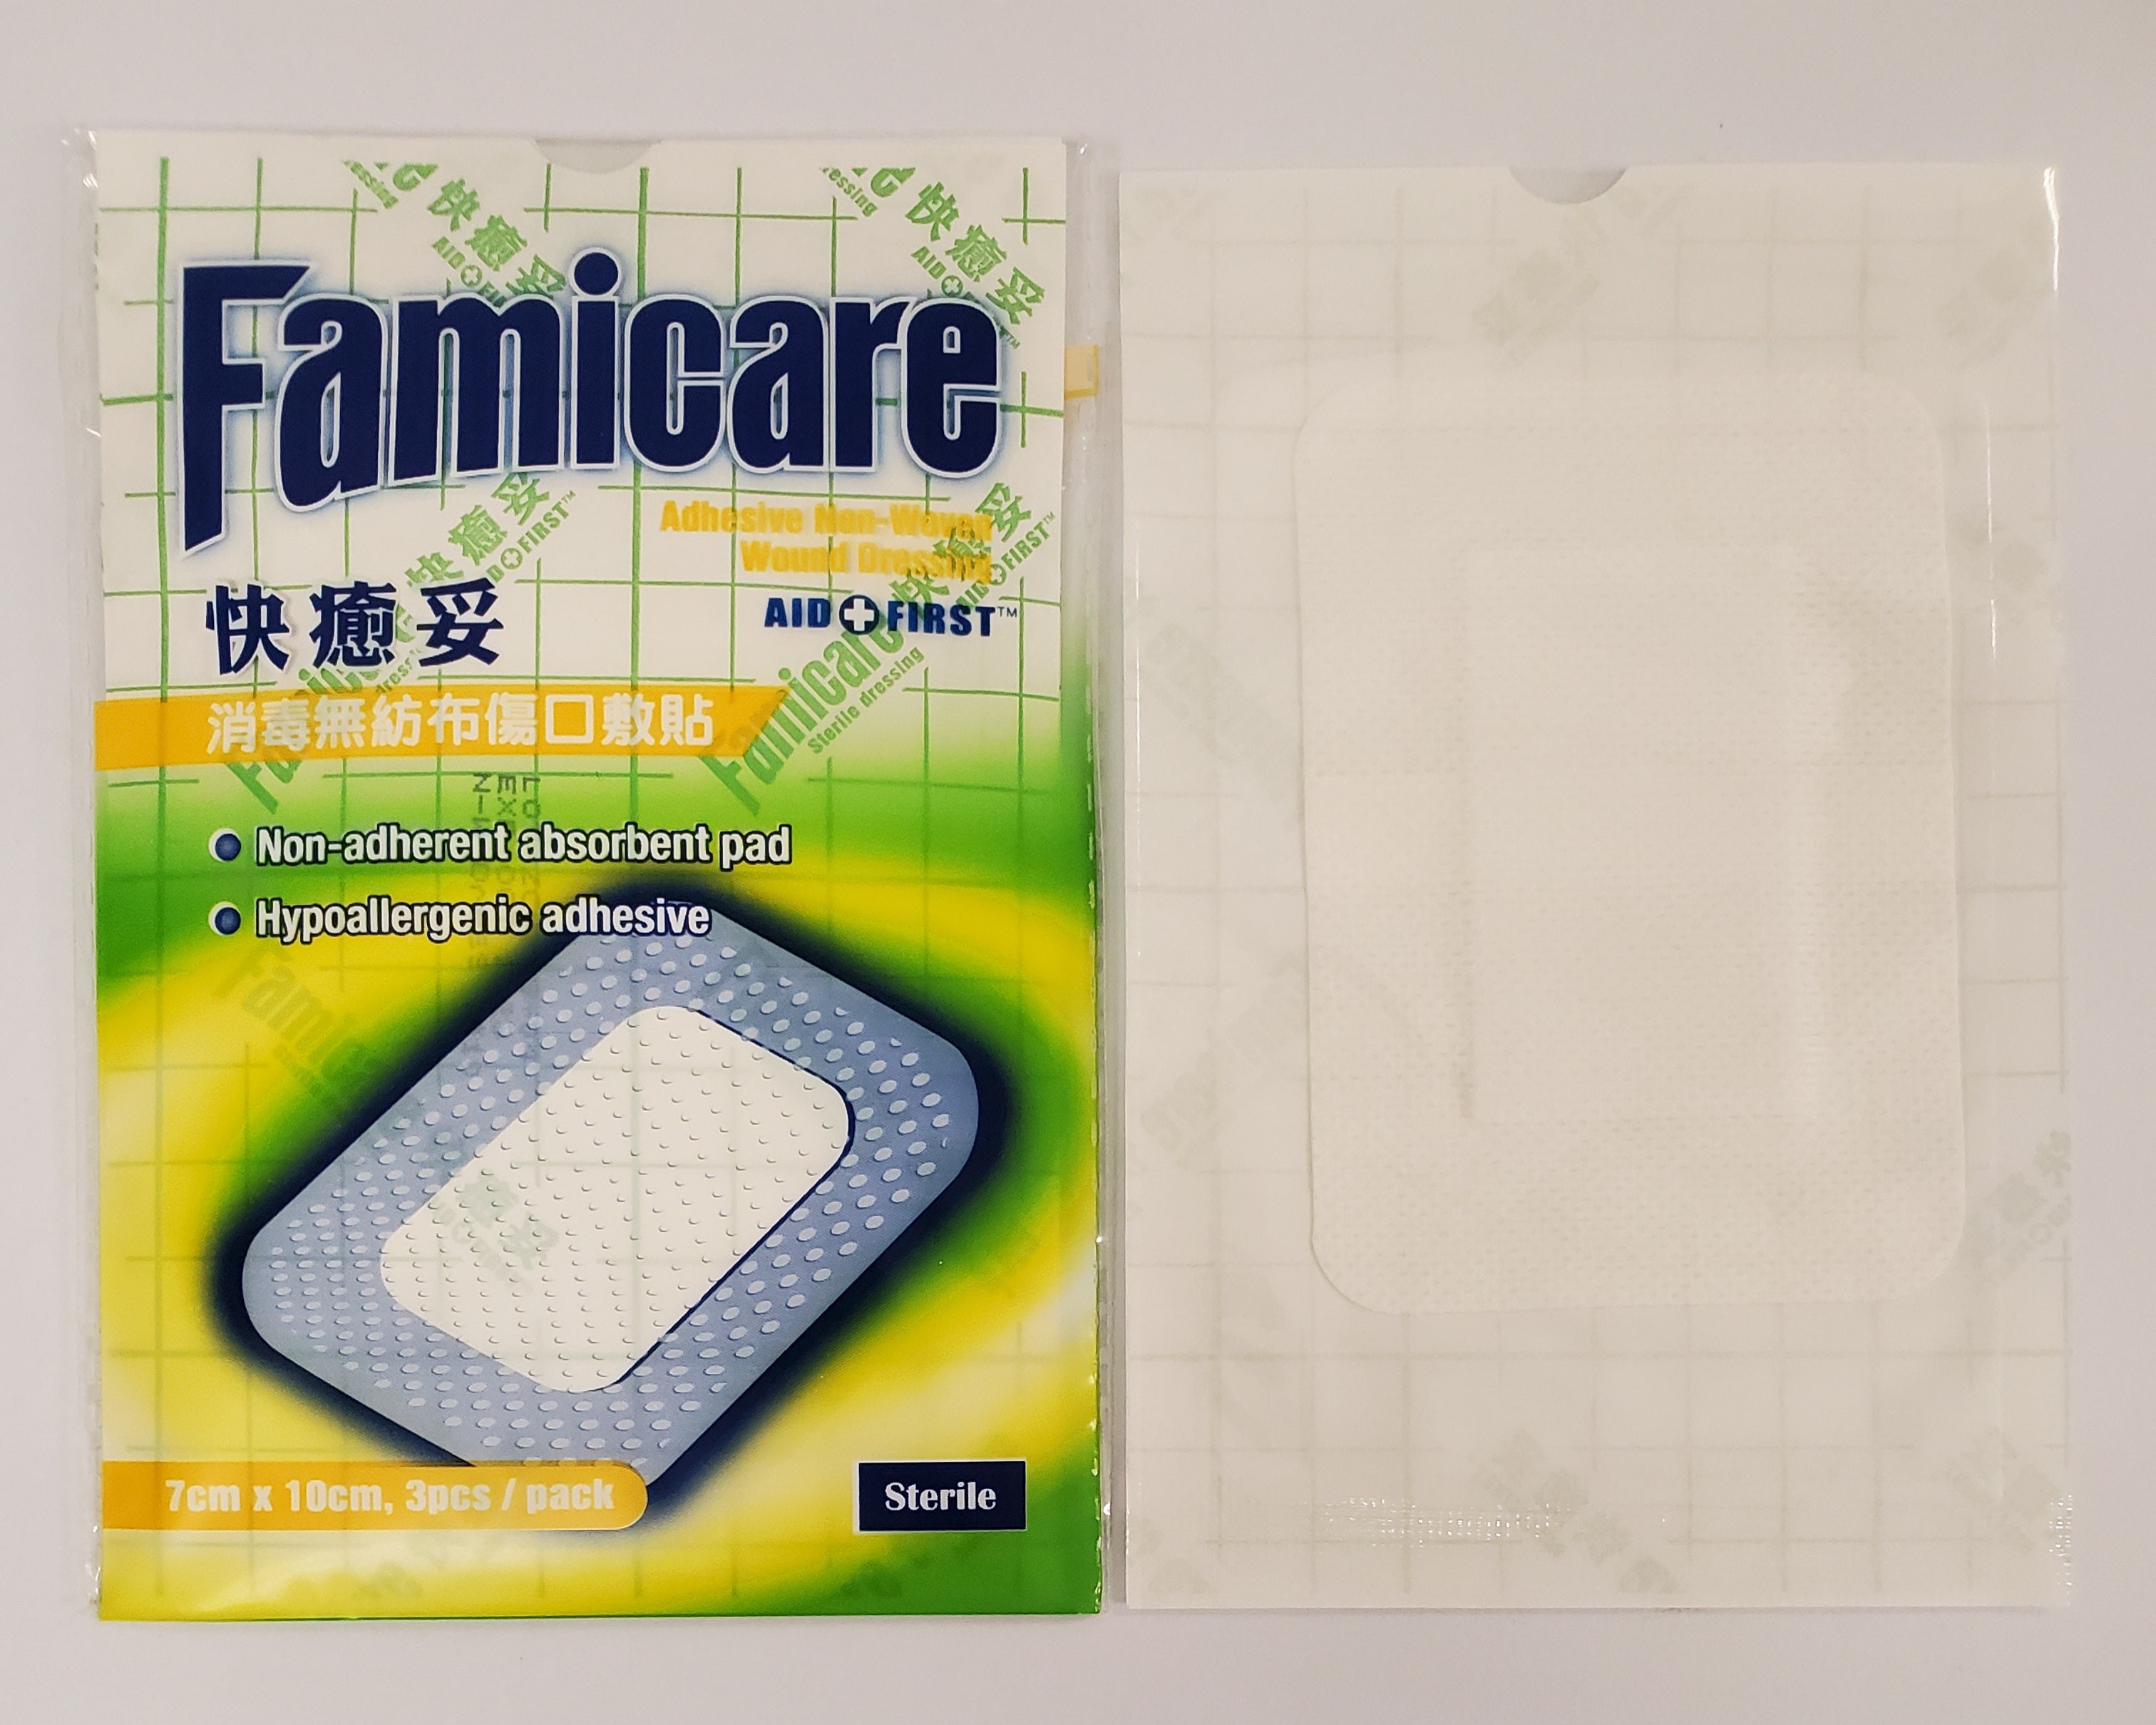 Famicare Adhesive Non-Woven Wound Dressing - 3PCS